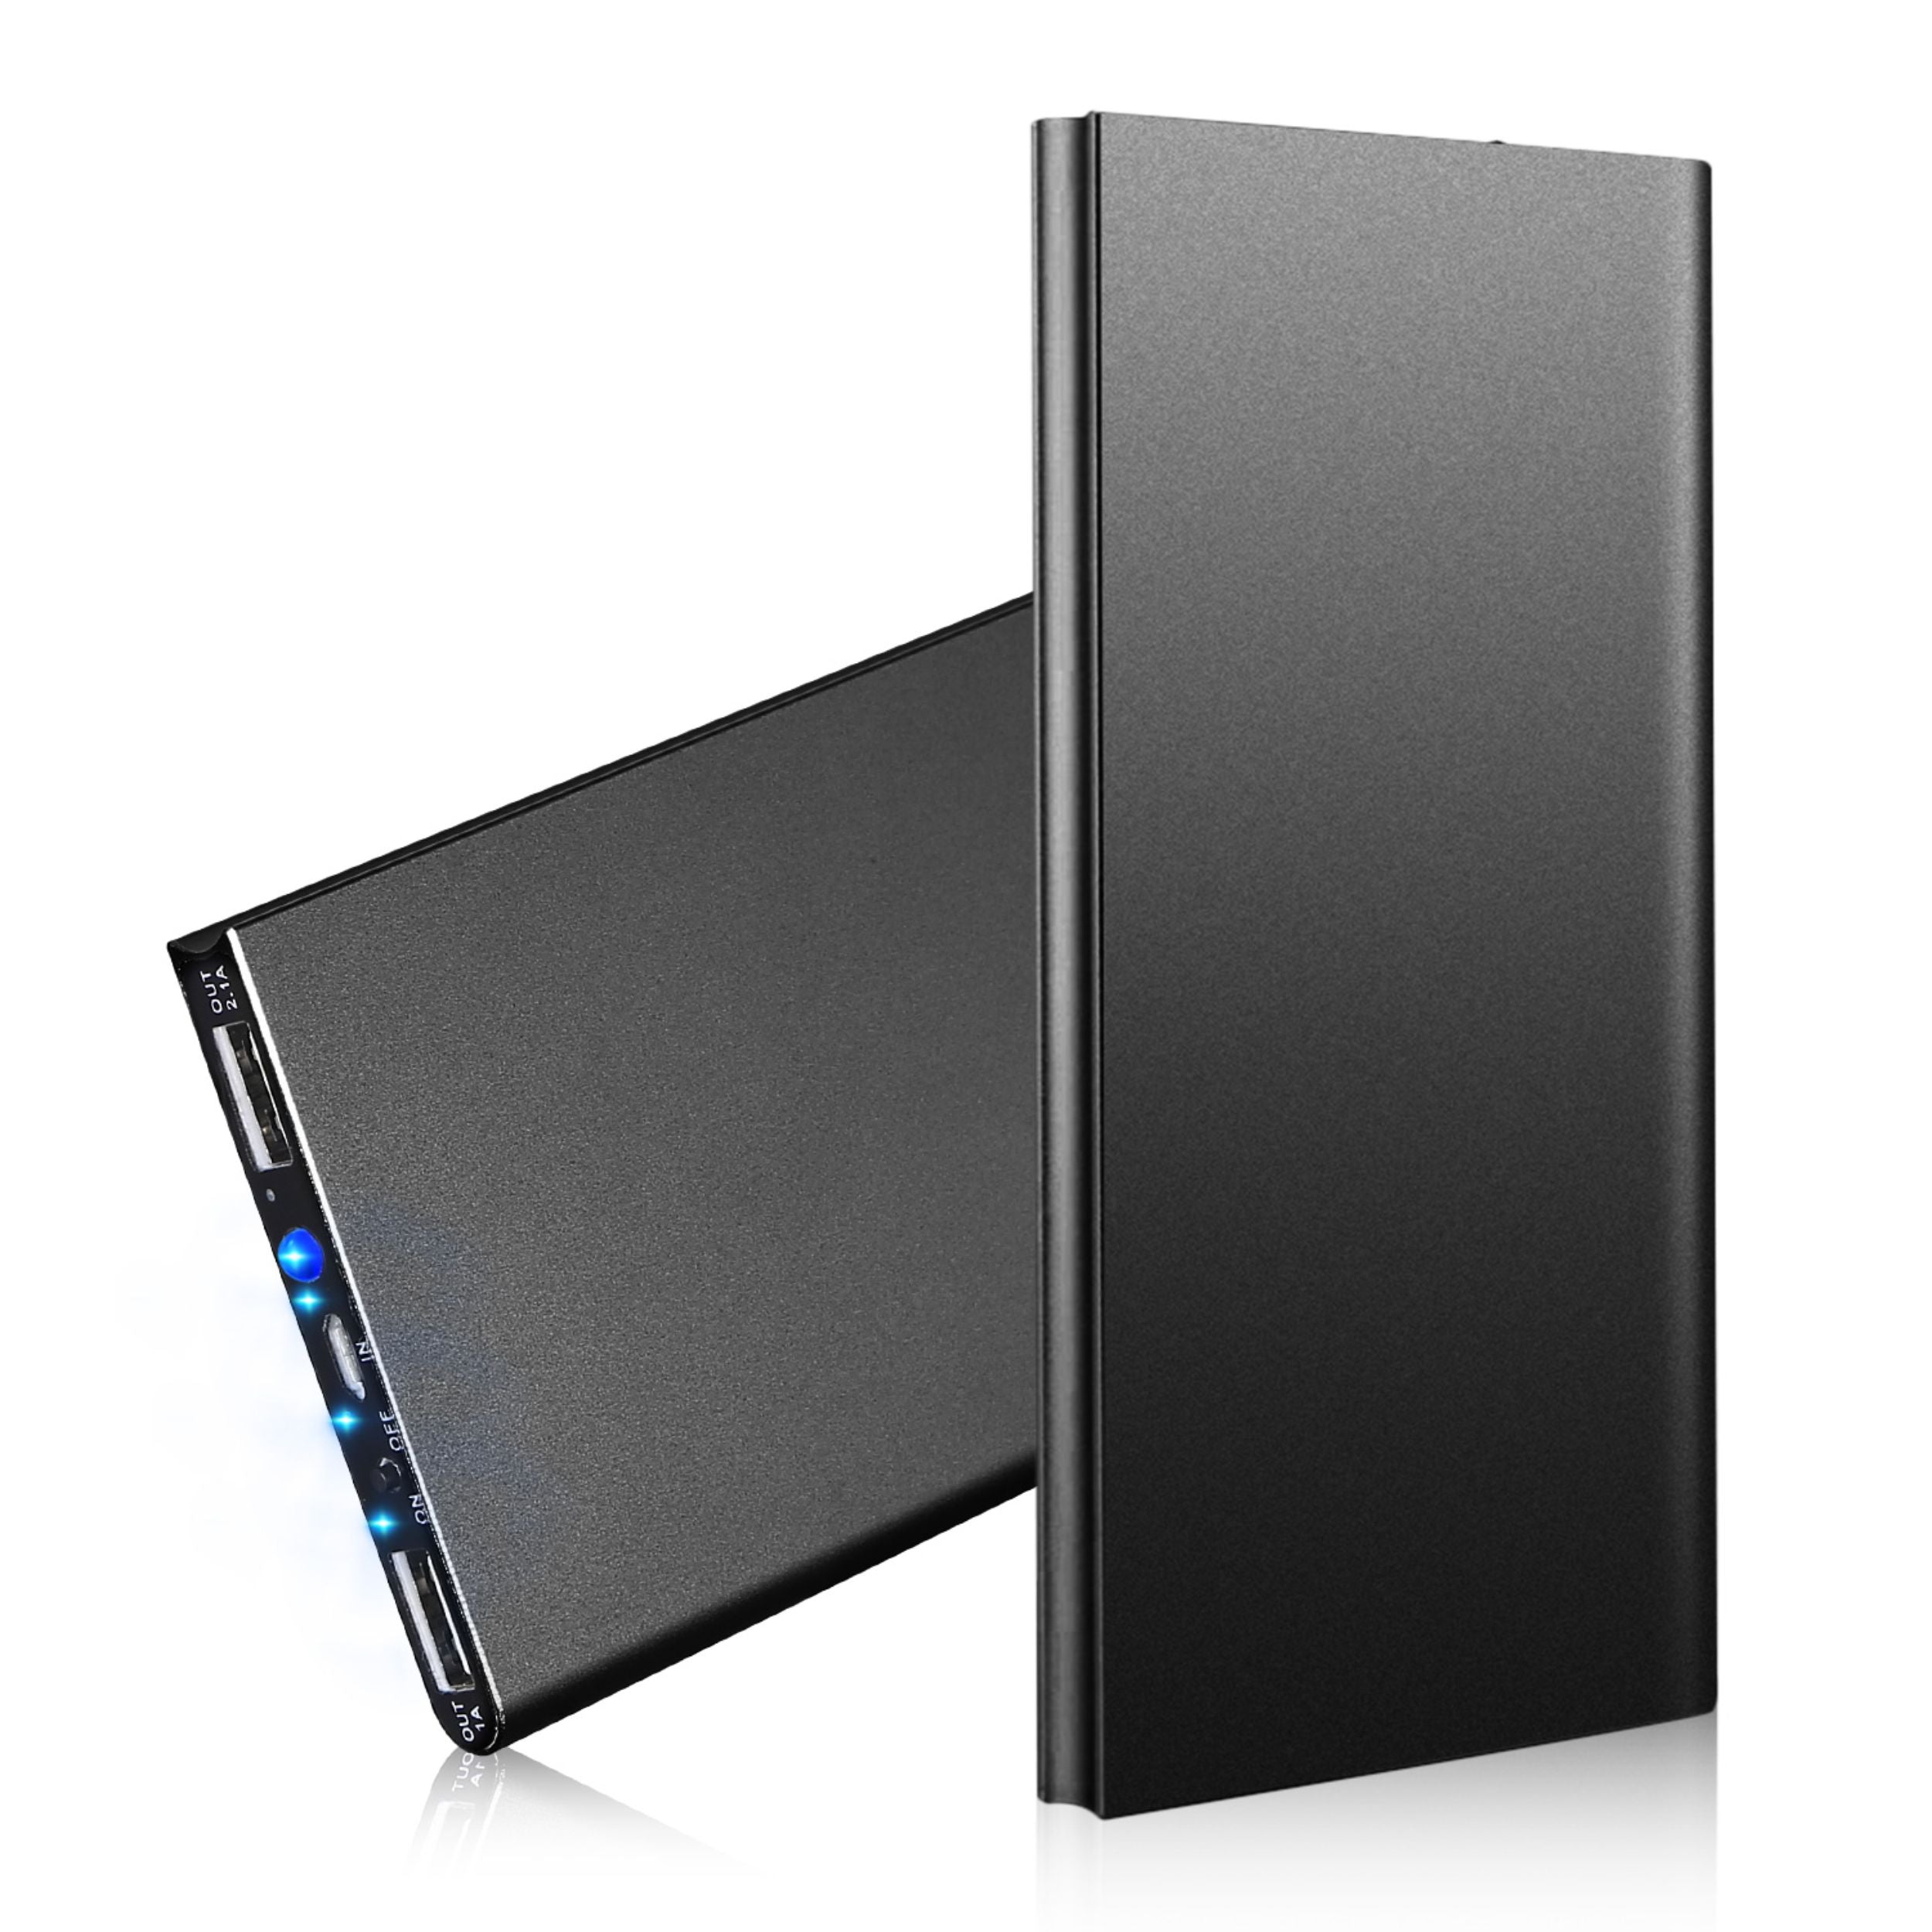 title:20K mAh Ultra-thin Power Bank: Dual USB, Phone Charger;color:Black